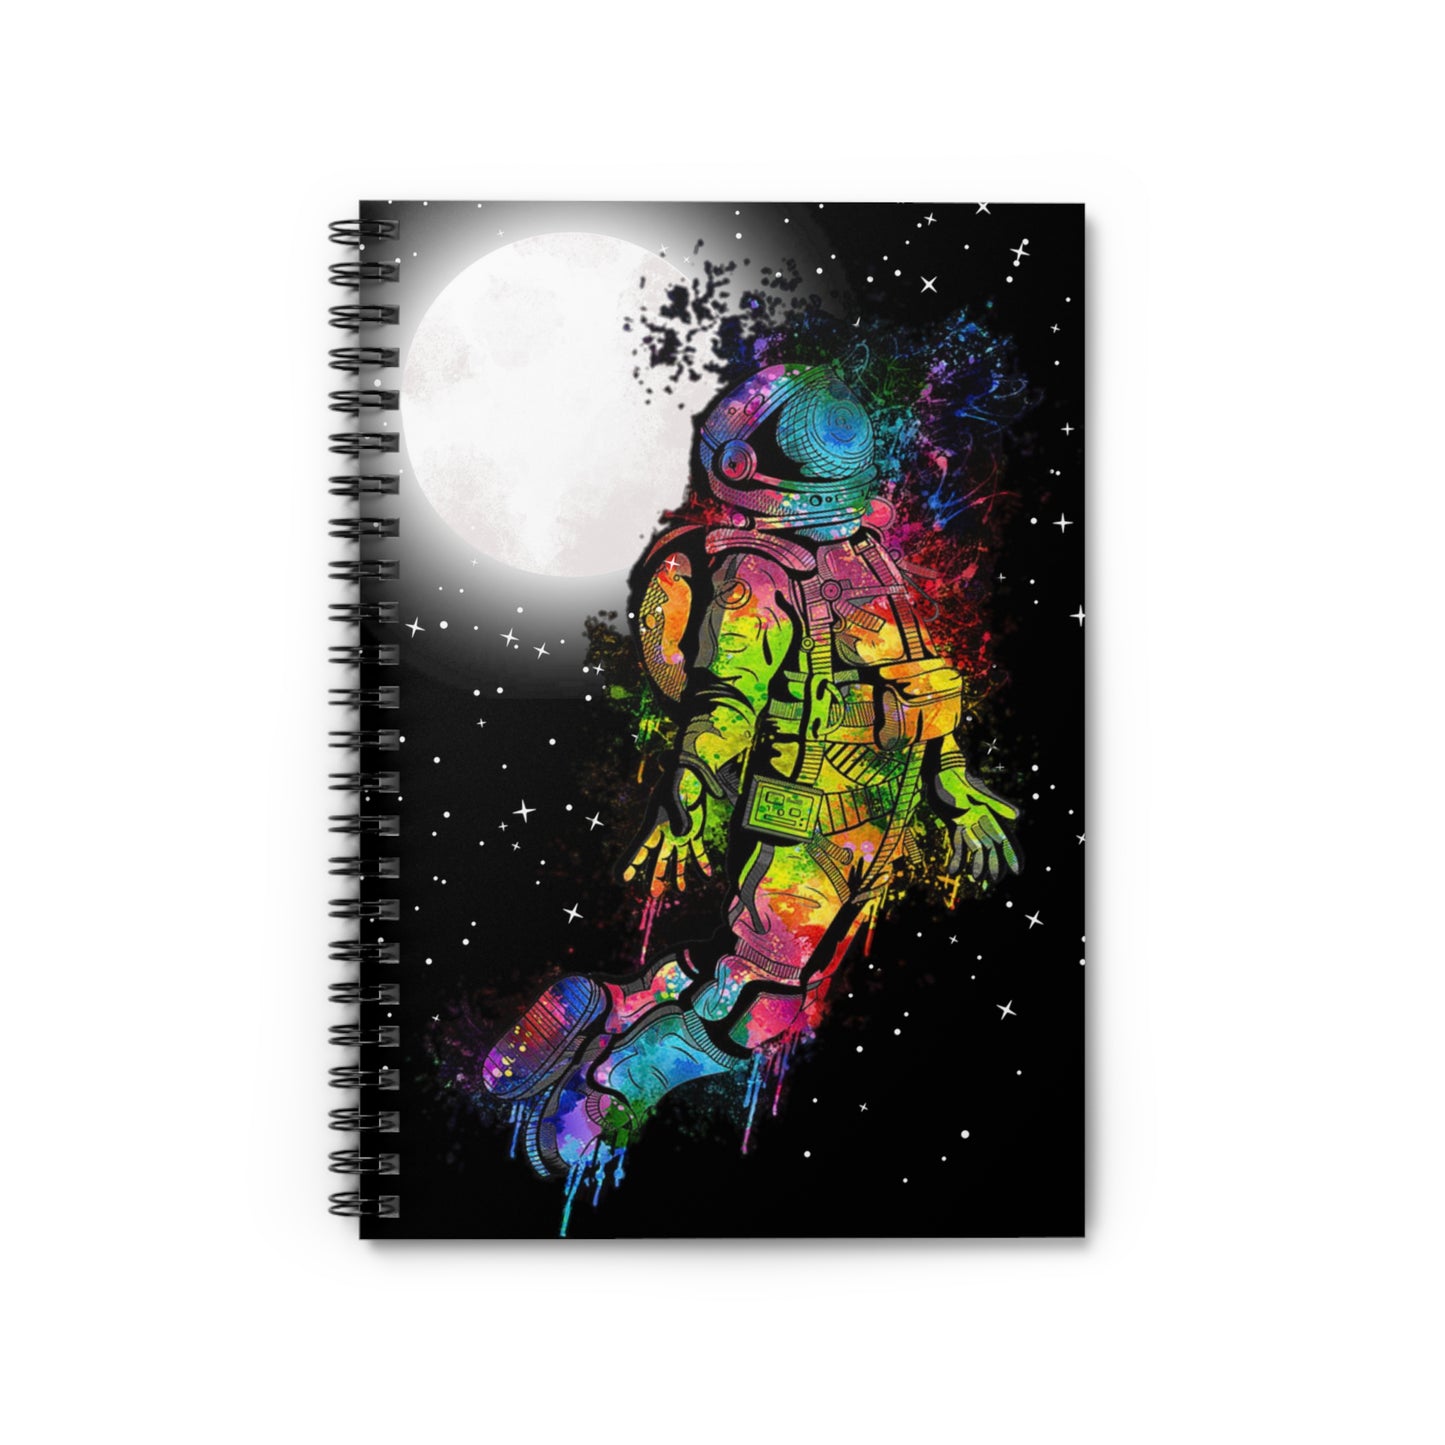 Space Astronaut Spiral Journal Notebook - Ruled Line